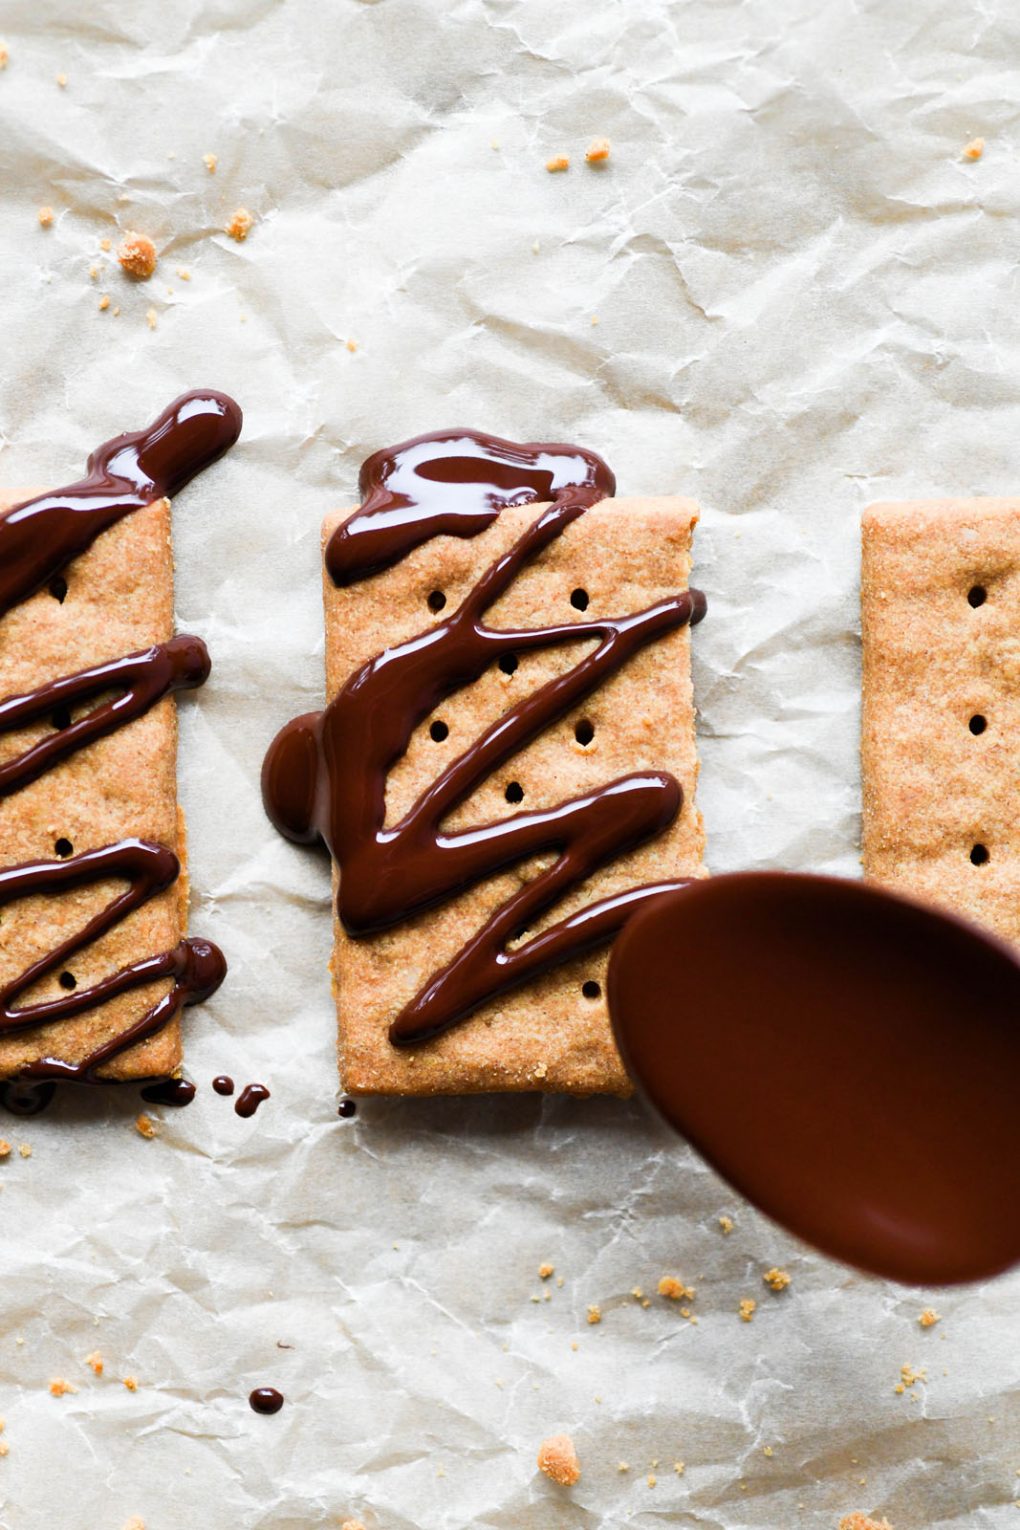 Overhead view of a spoon drizzling melted chocolate over graham crackers, on light brown parchment paper.